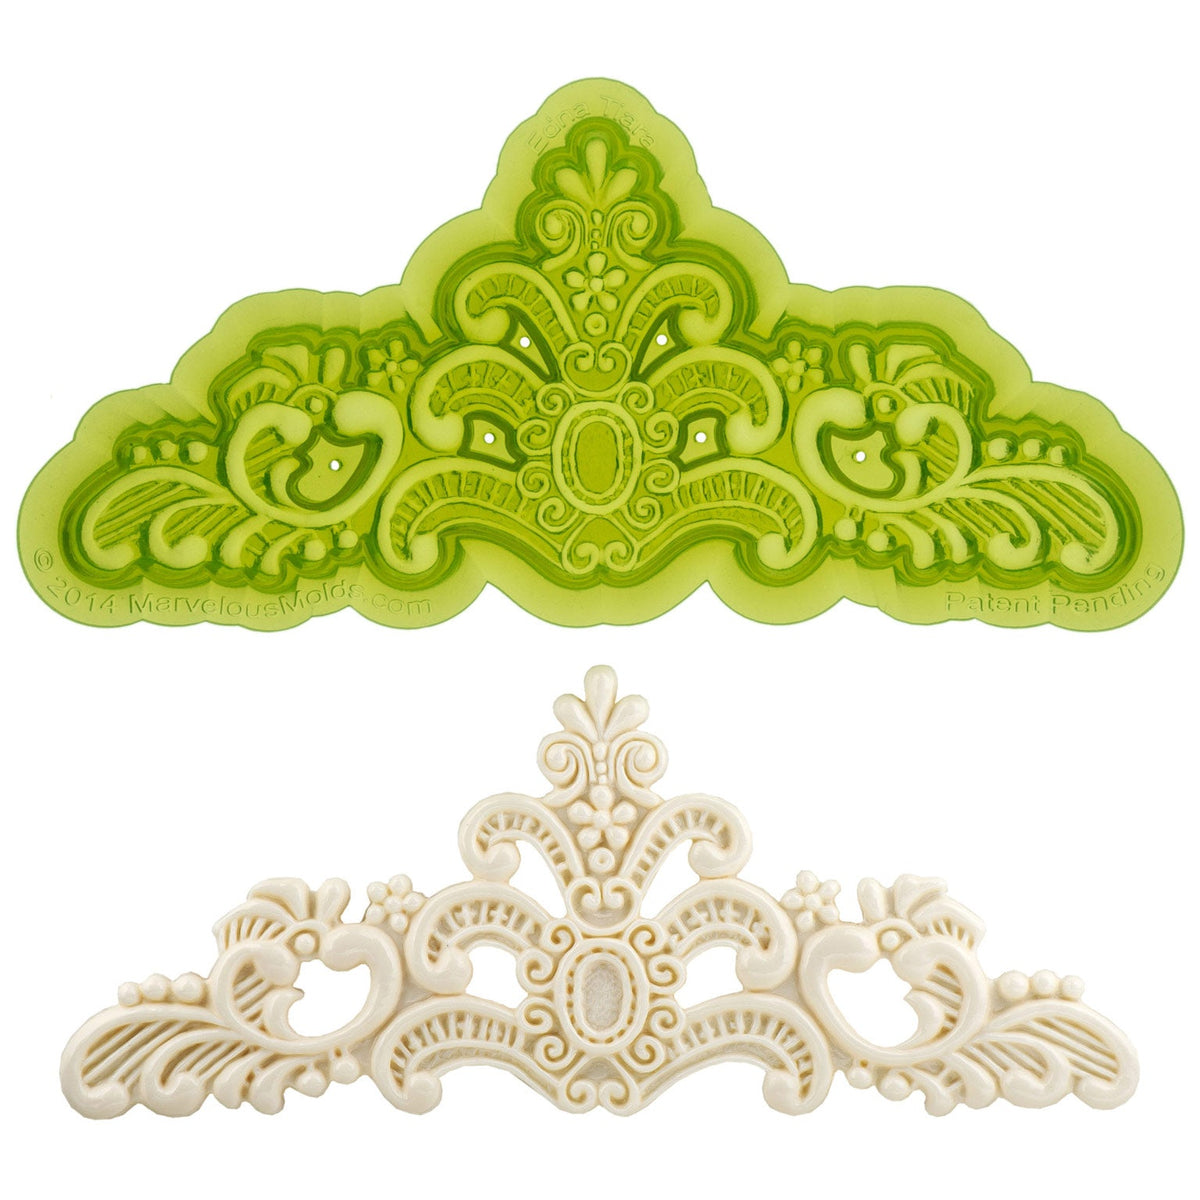 Browse Edna Lace Mold Marvelous Molds and other brands. Stop by our store  today to take advantage of huge savings